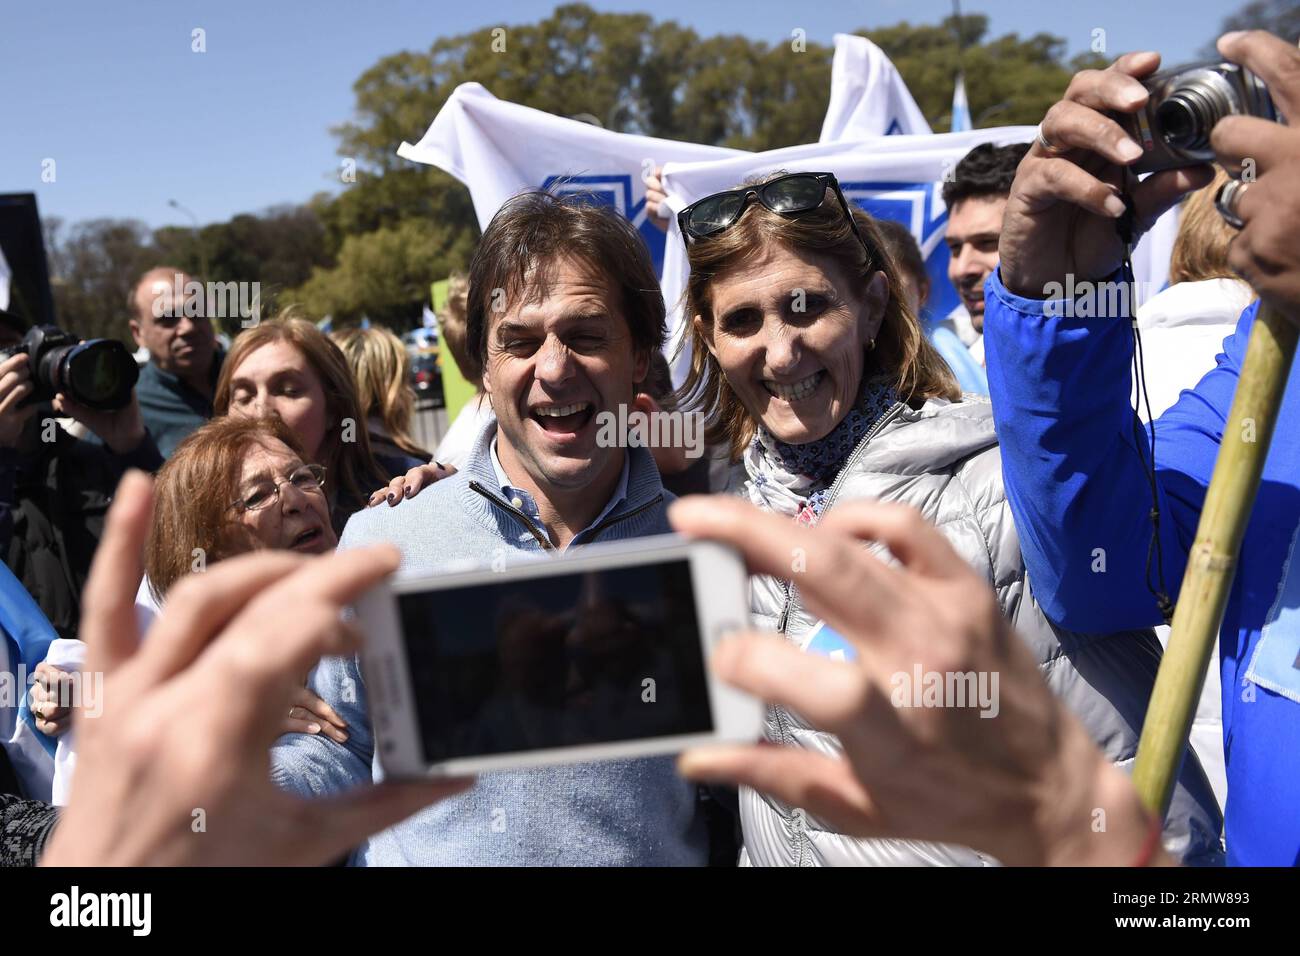 Presidential candidate of the opposition National Party Luis Lacalle Pou (C) poses with a supporter during an electoral campaign act at Batlle Park, in Montevideo, capital of Uruguay, on Oct. 11, 2014. The presidential and parliamentary elections of Uruguay are scheduled for Oct. 26, 2014. ) (da) (fnc) URUGUAY-MONTEVIDEO-POLITICS-ELECTIONS NICOLASxCELAYA PUBLICATIONxNOTxINxCHN   Presidential Candidate of The Opposition National Party Luis Lacalle Pou C Poses With a Supporter during to Electoral Campaign ACT AT Batlle Park in Montevideo Capital of Uruguay ON OCT 11 2014 The Presidential and Par Stock Photo